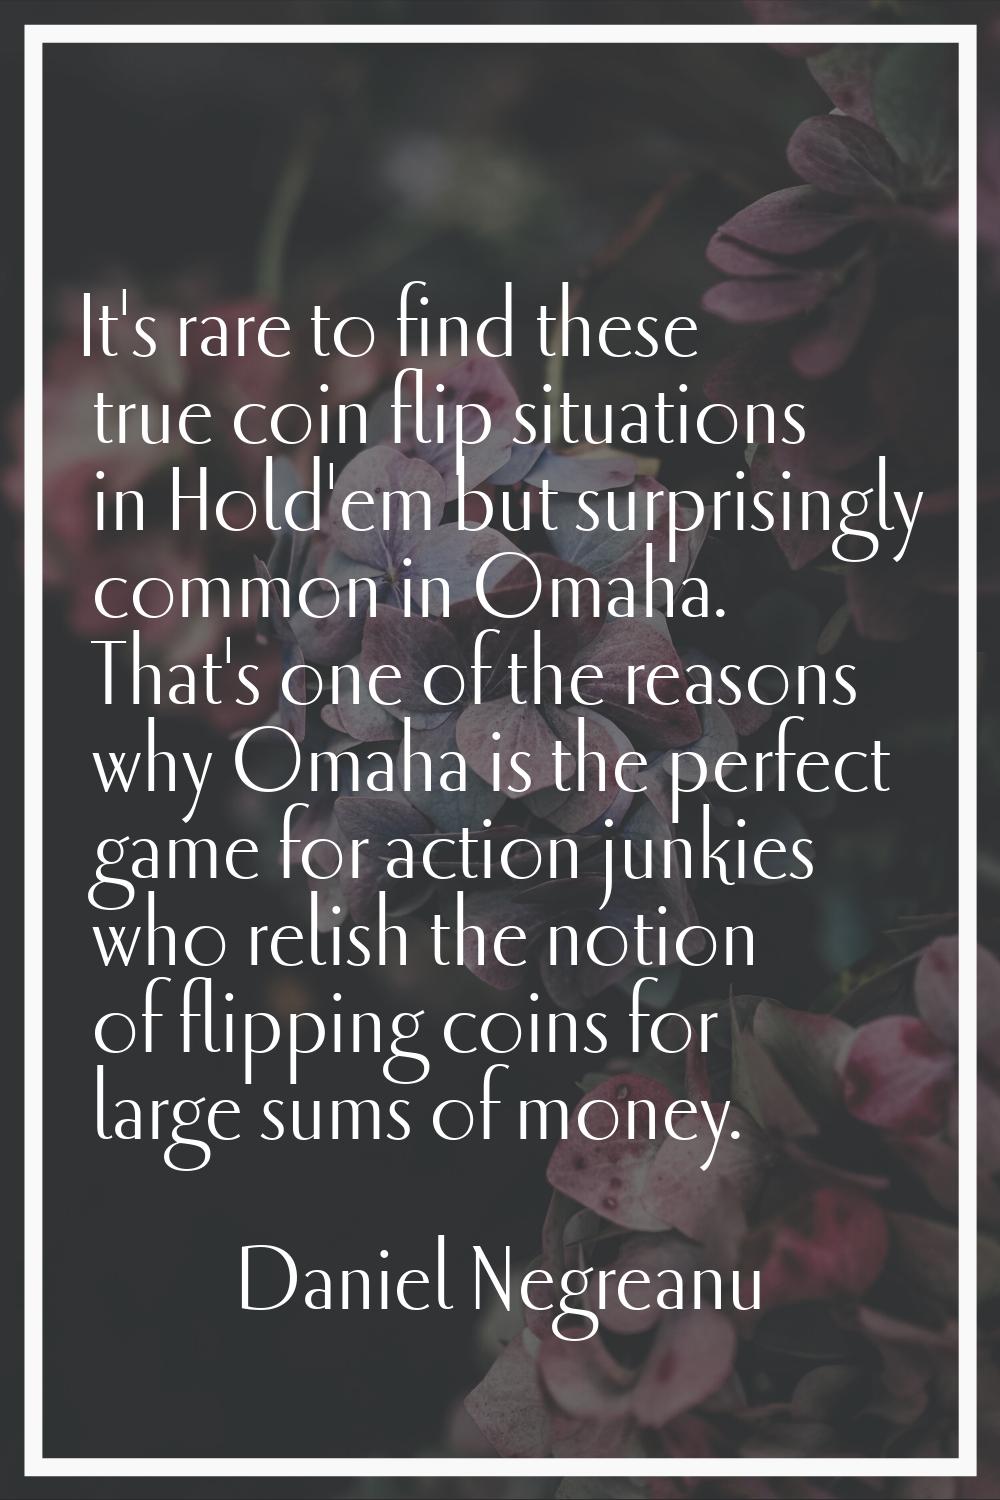 It's rare to find these true coin flip situations in Hold'em but surprisingly common in Omaha. That